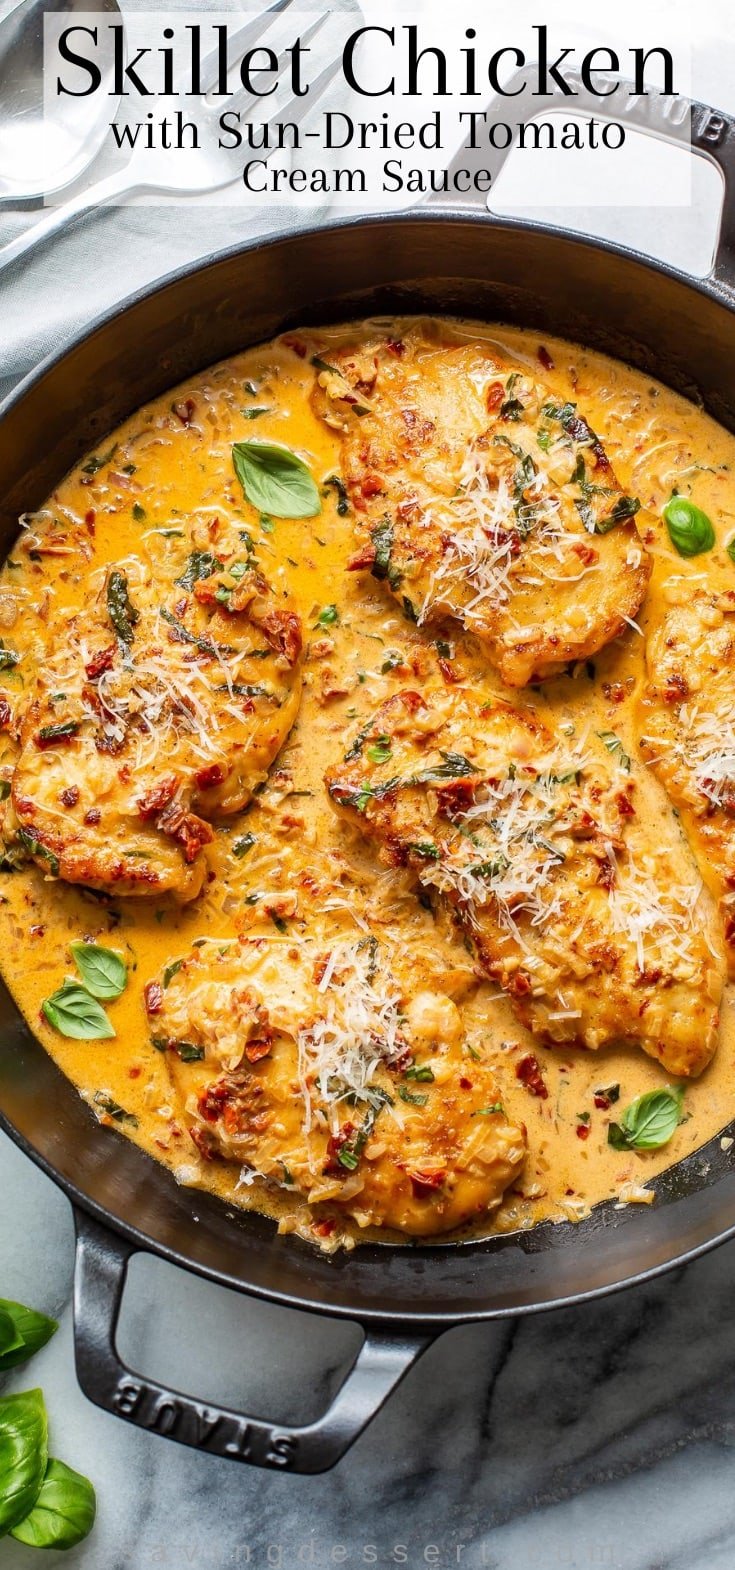 A close-up of a skillet with chicken breasts in a sun-dried tomato cream sauce with fresh basil